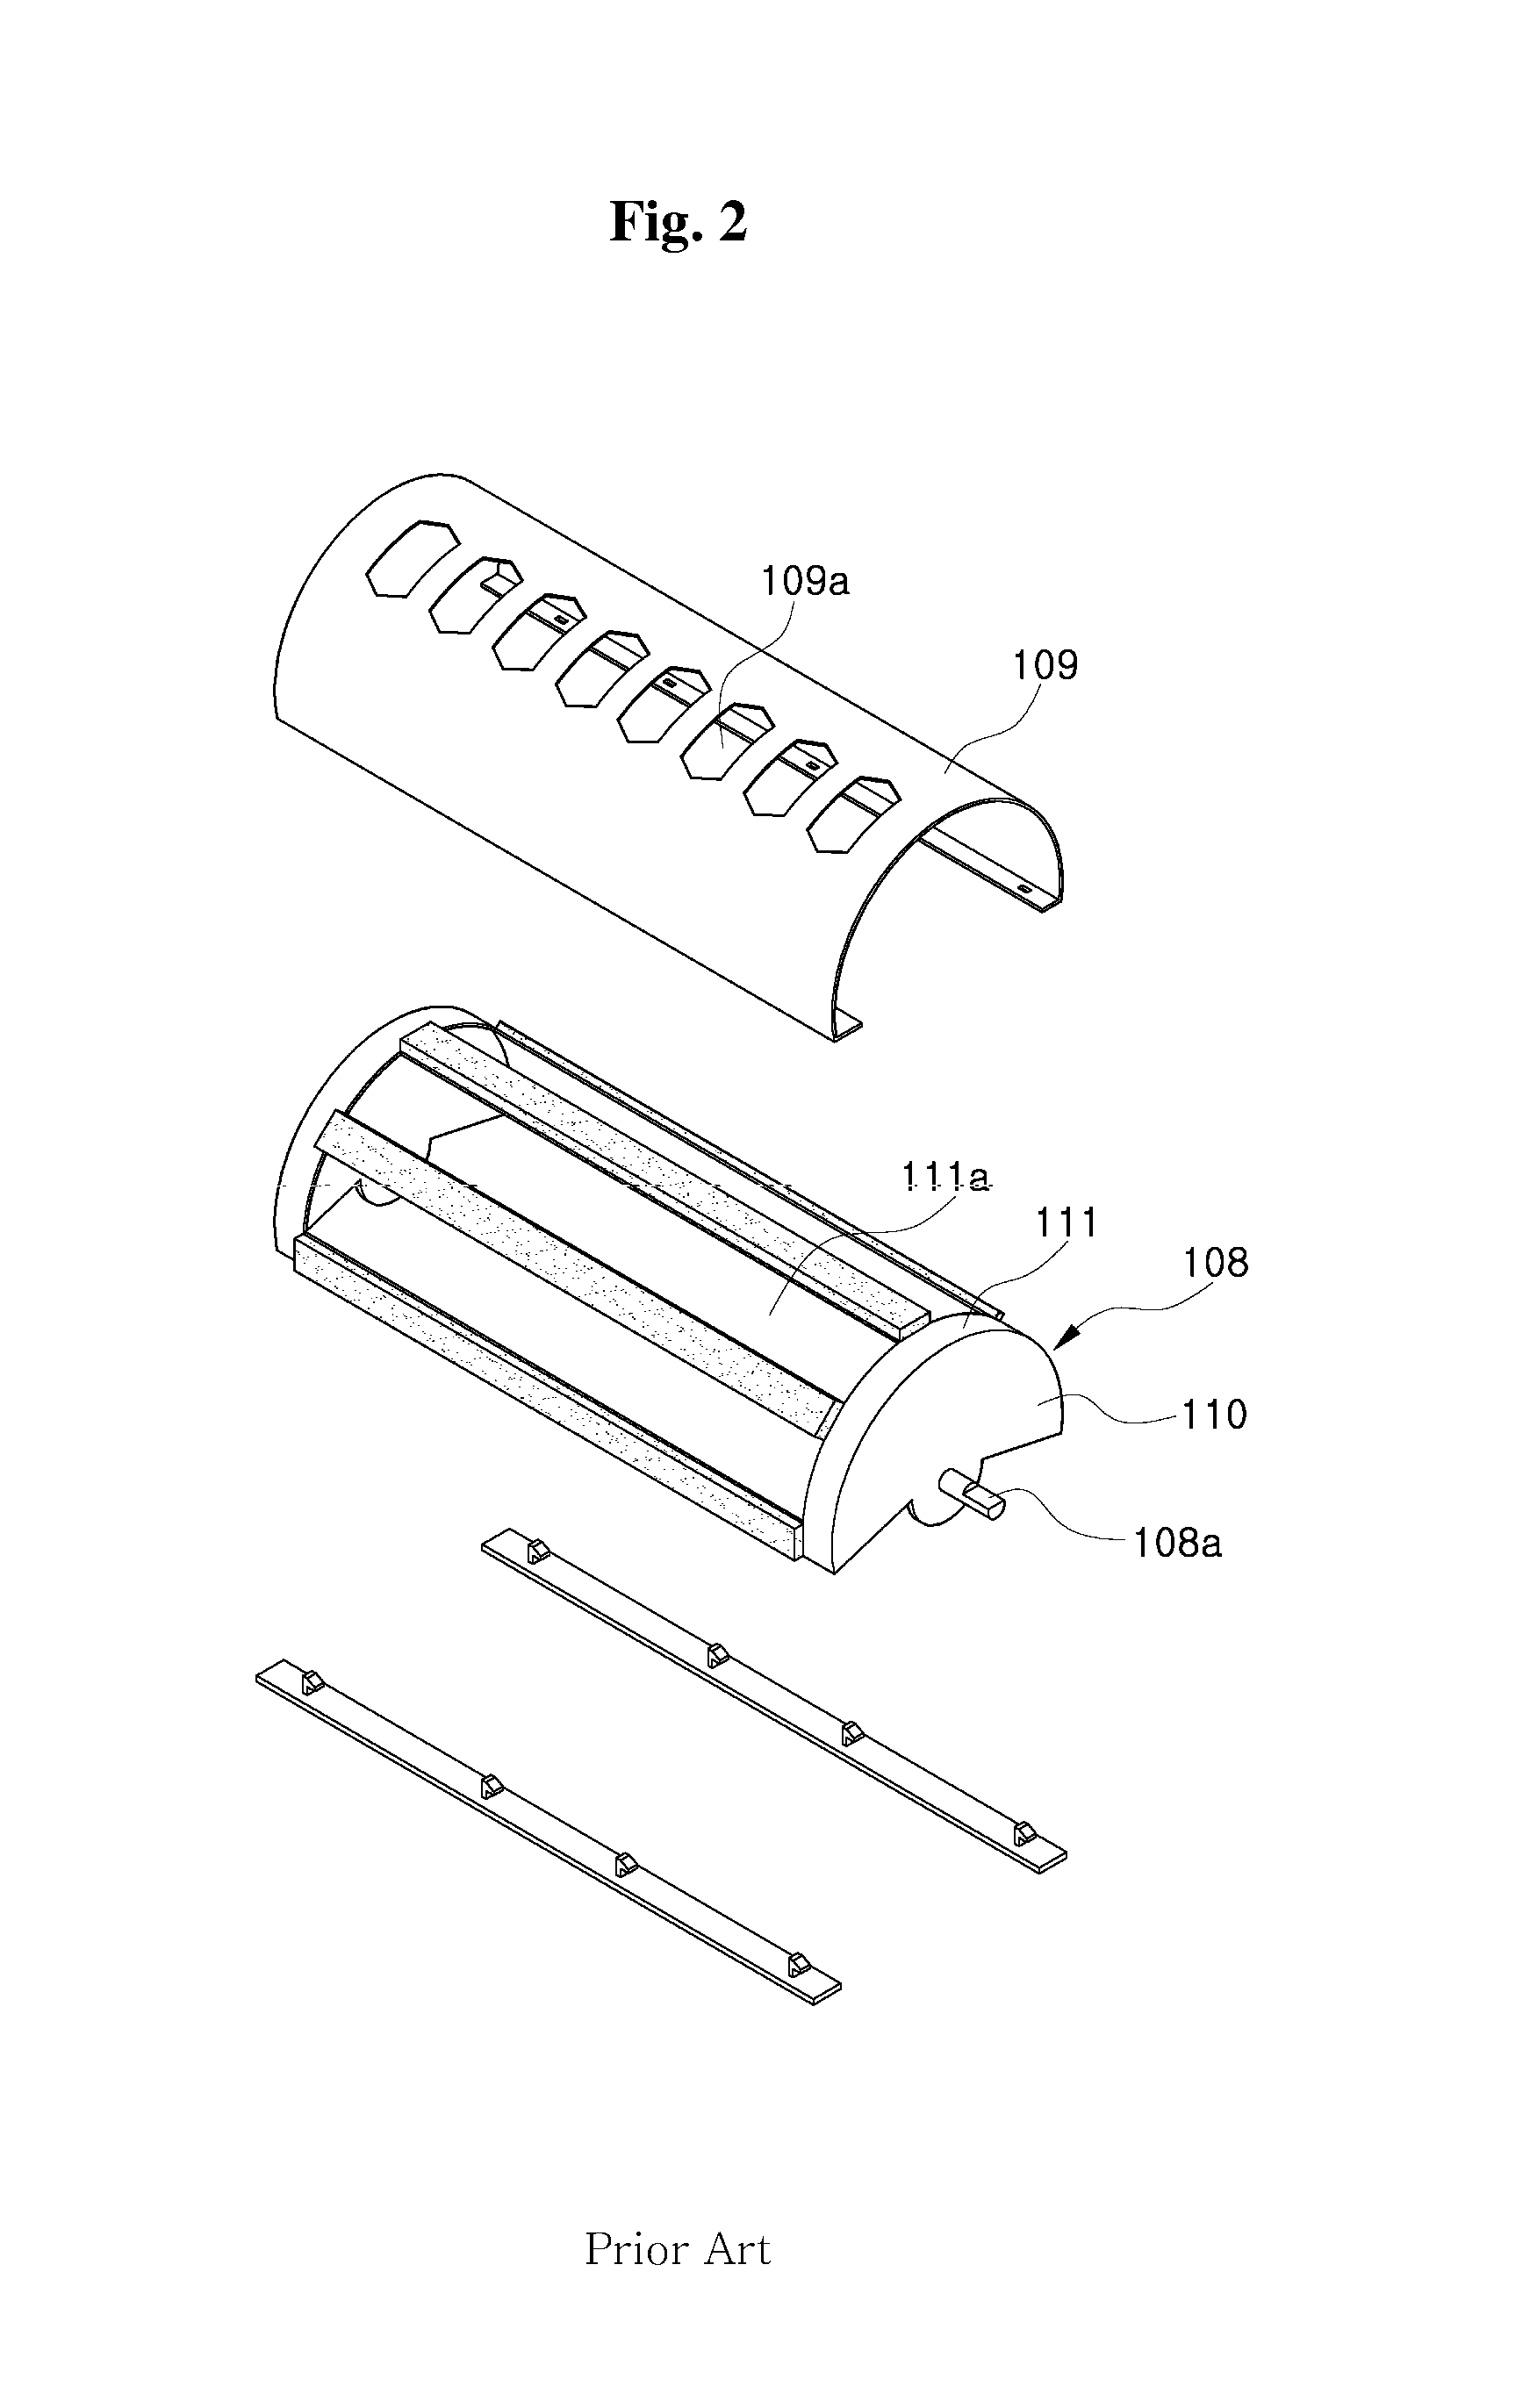 Mode door for the automotive vehicle air conditioning system